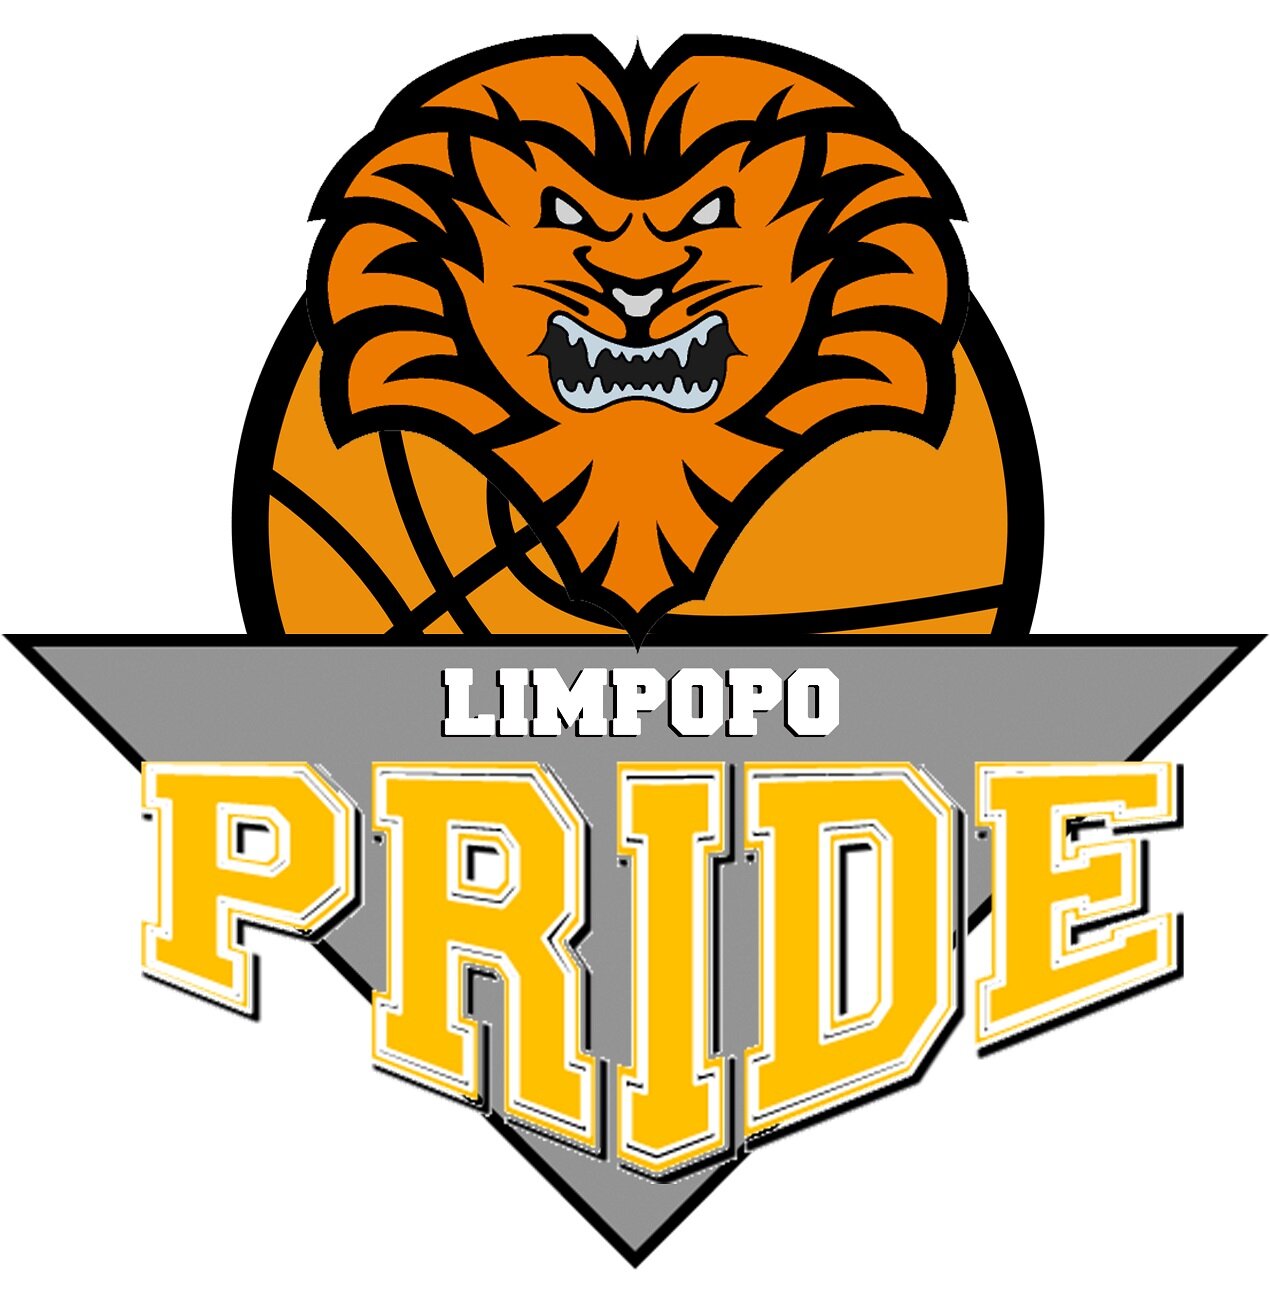 Professional Basketball Club of Limpopo Pride in the Basketball National League of South Africa (BNL).